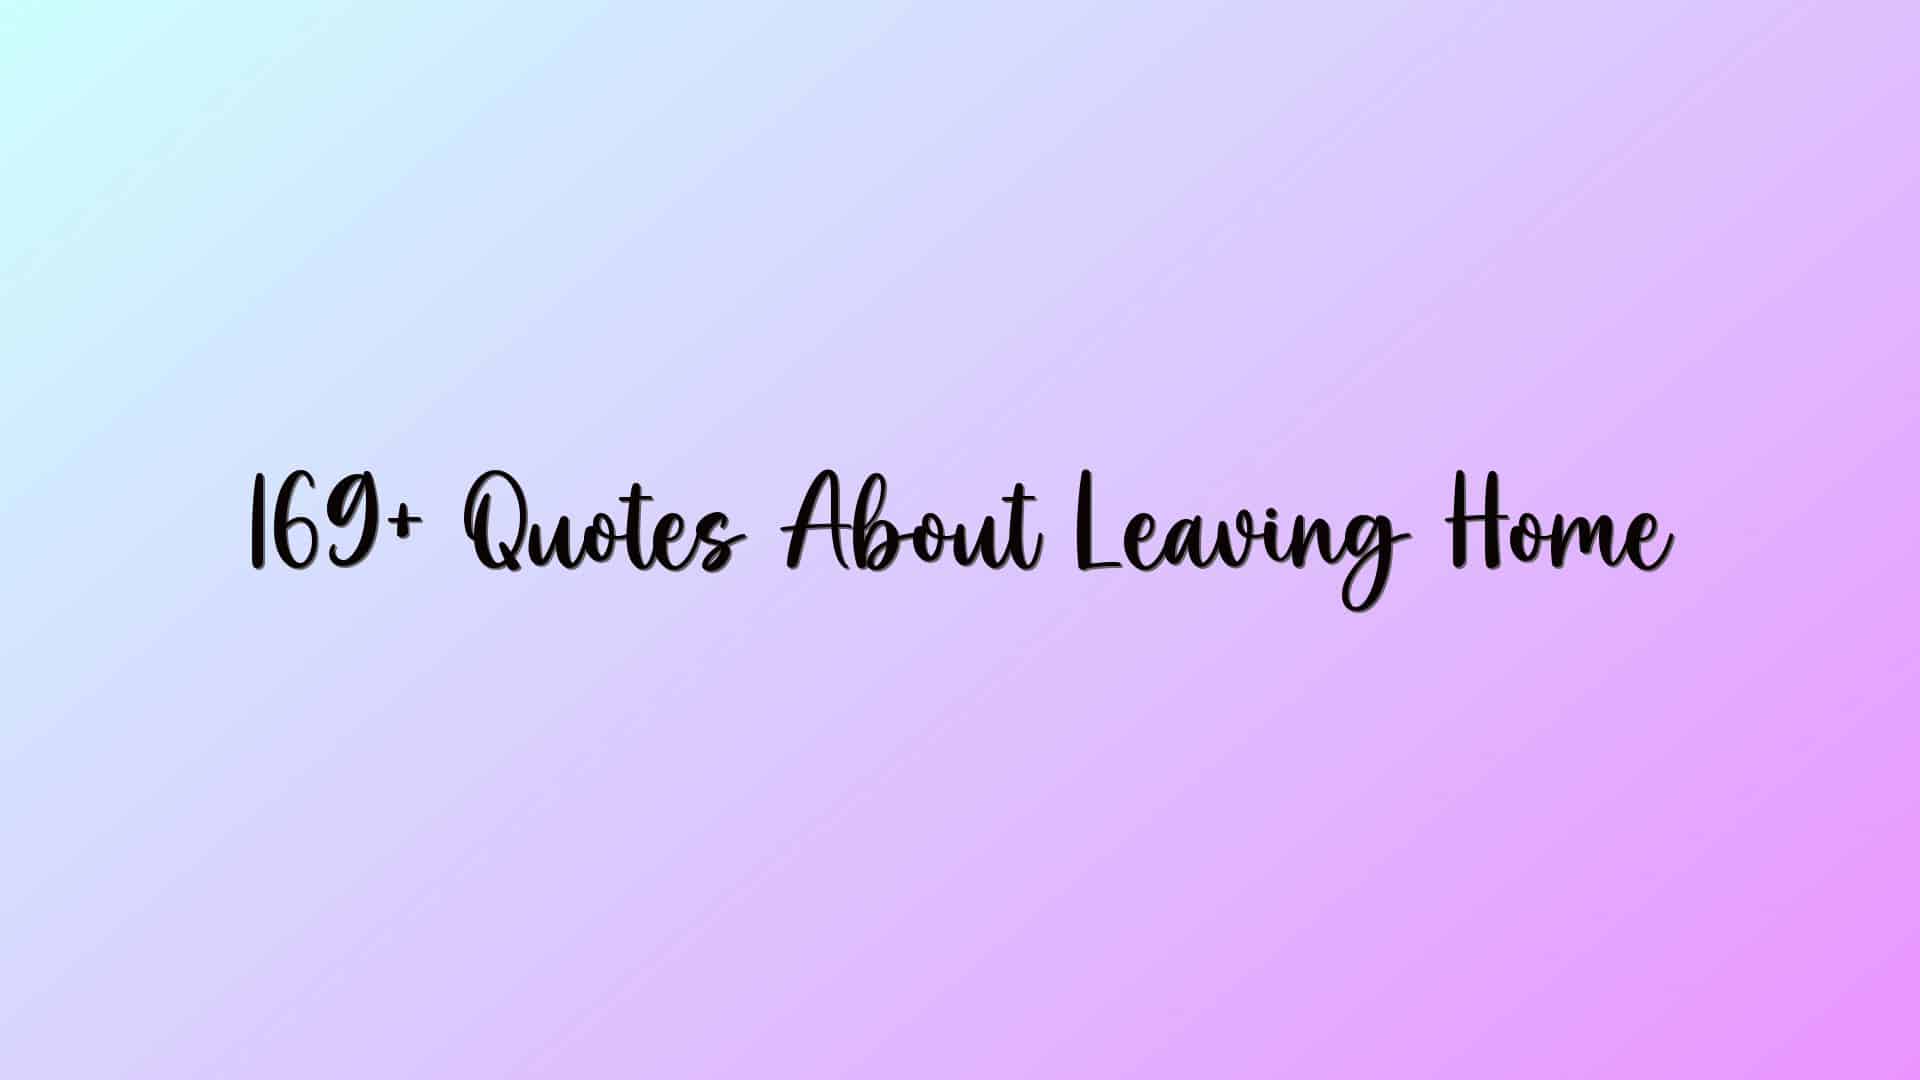 169+ Quotes About Leaving Home